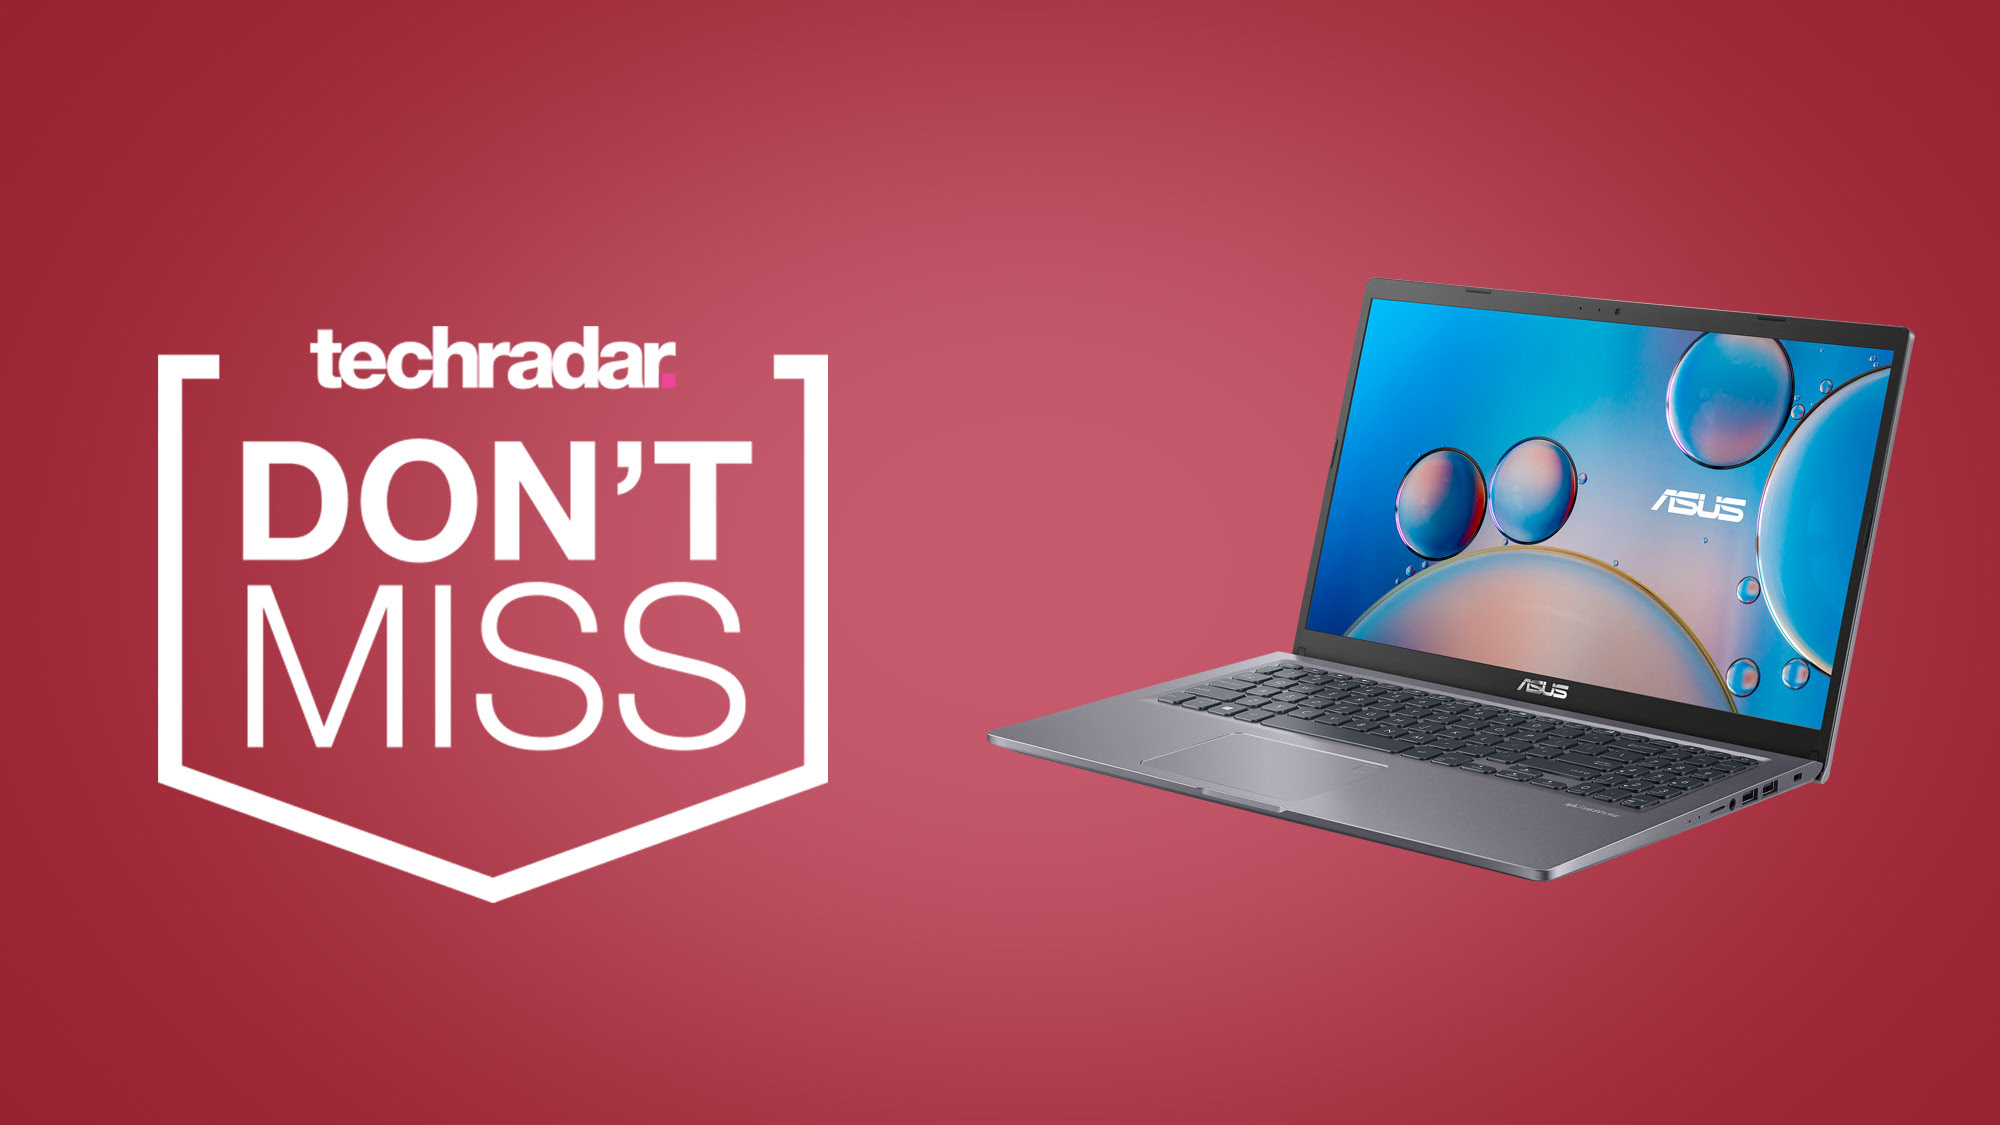 Forget Prime Day and get one of the best laptop deals we've seen all year right now